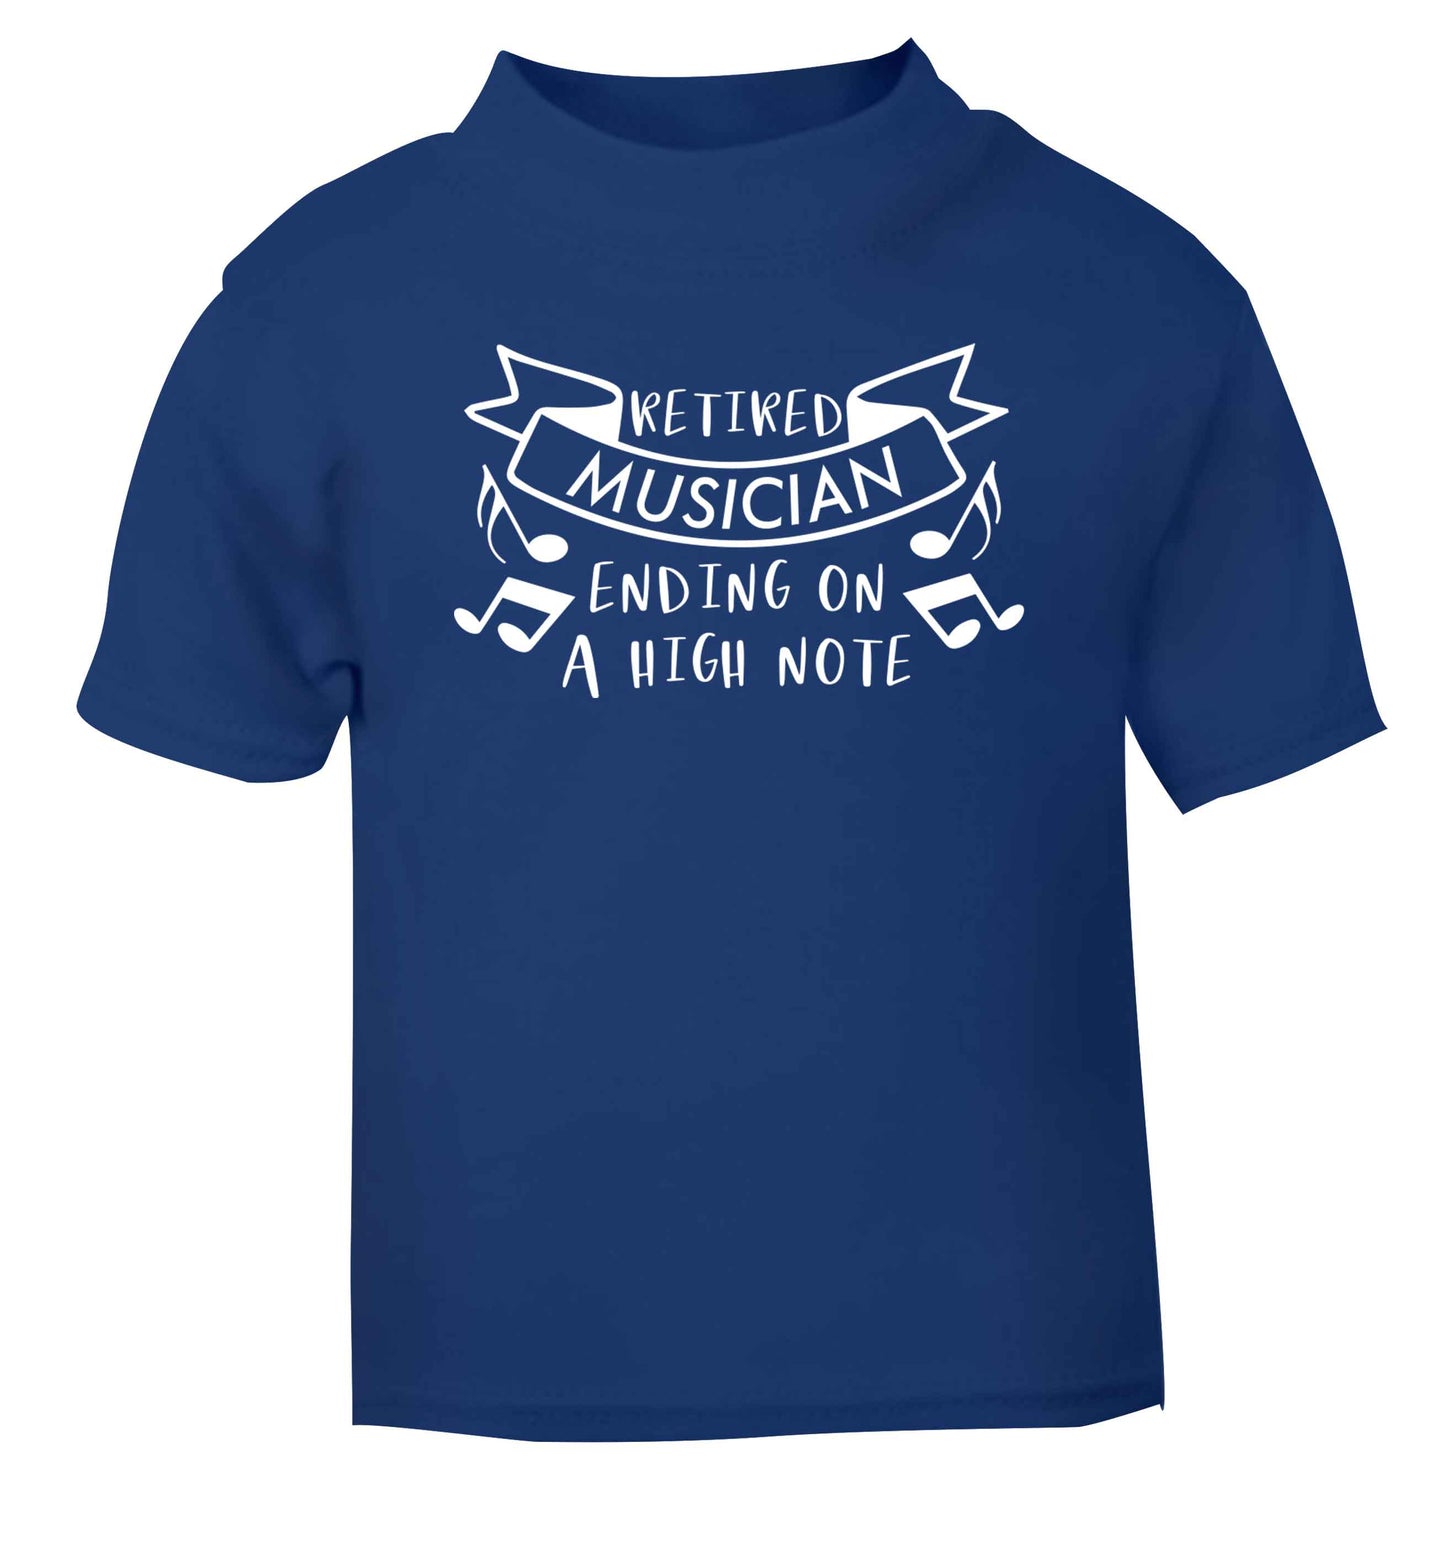 Retired musician ending on a high note blue Baby Toddler Tshirt 2 Years